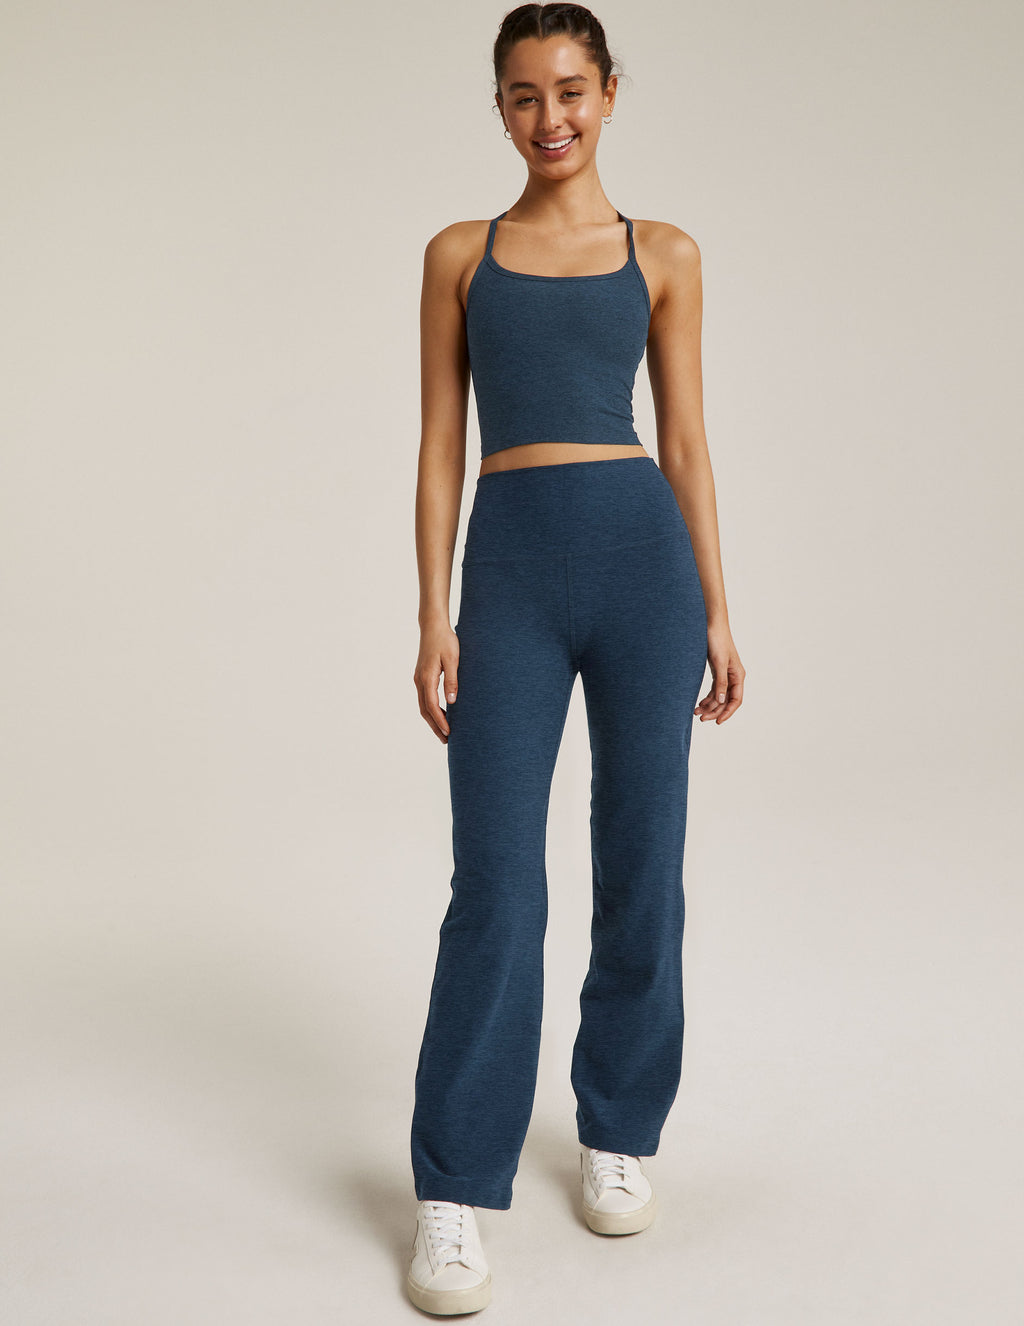 Spacedye Limitless High Waisted Straight Leg Pant Featured Image